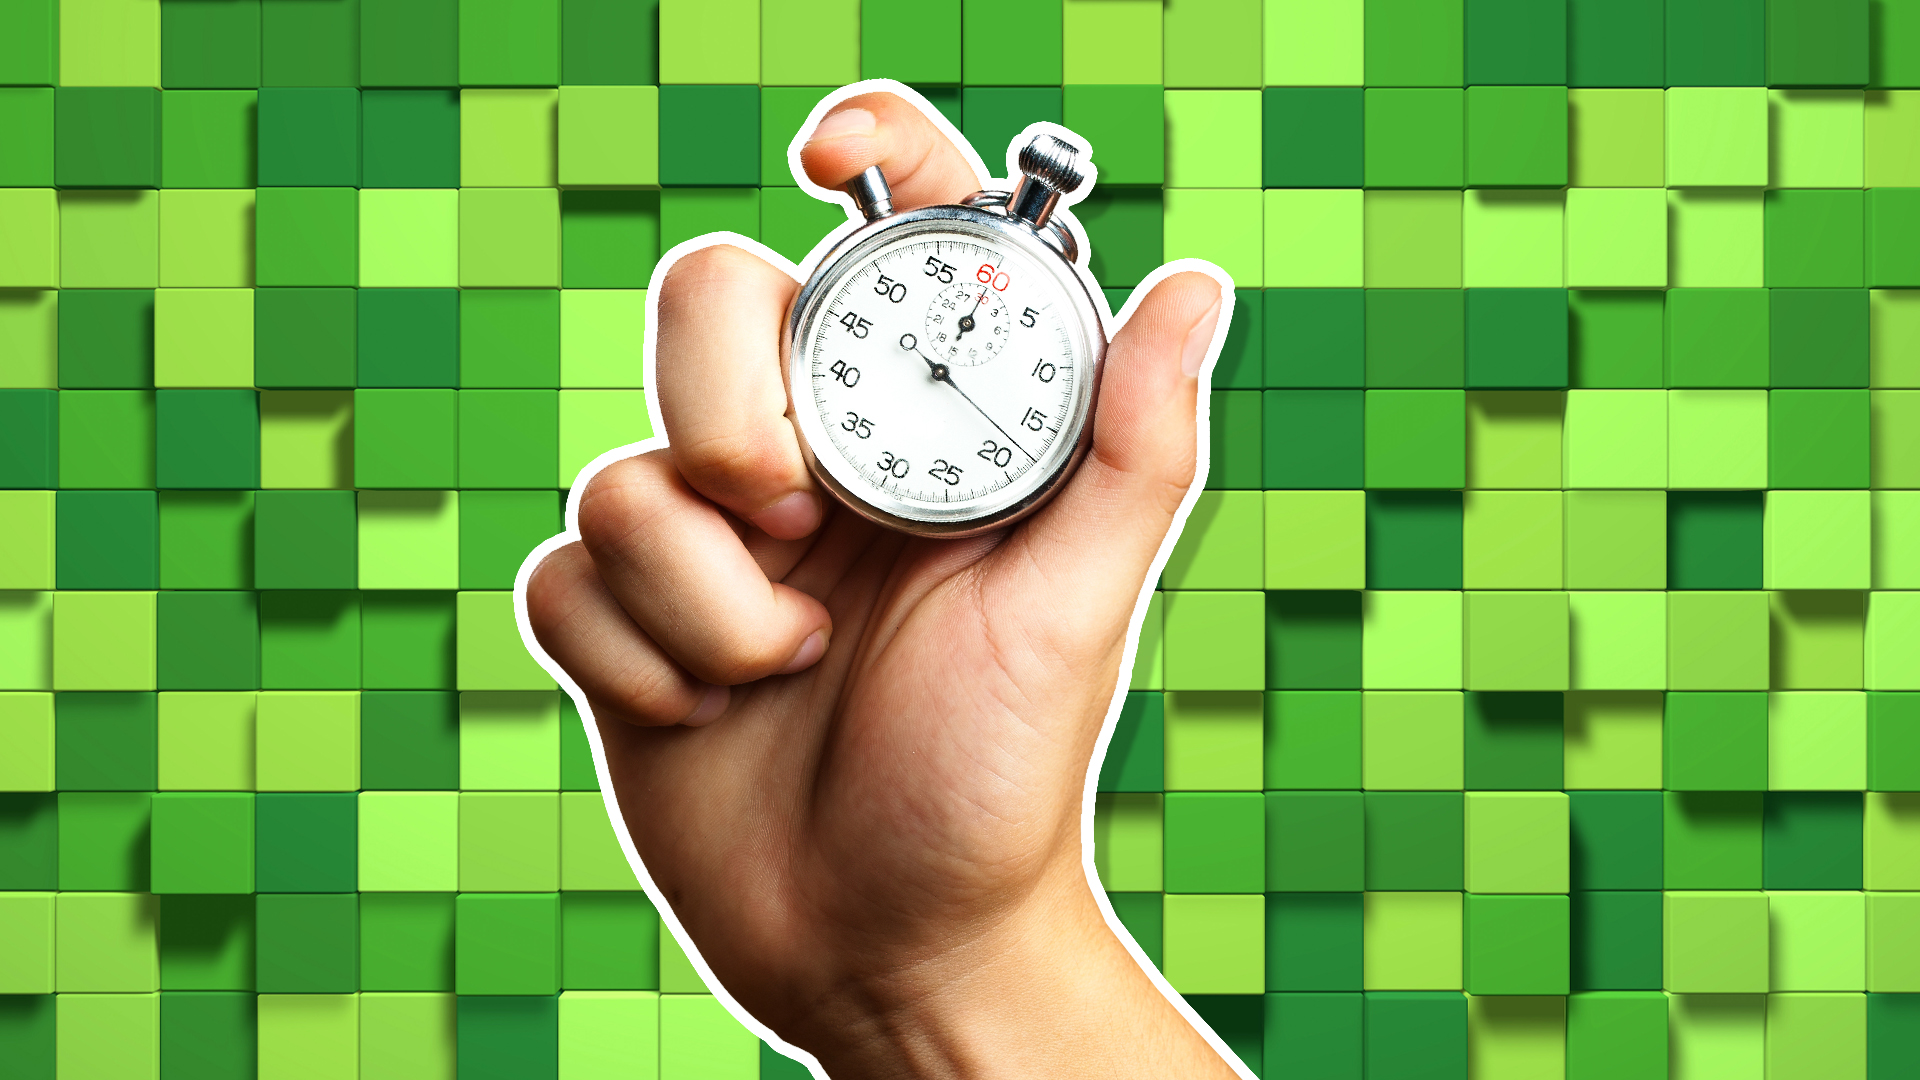 A stopwatch against a Minecraft-style background